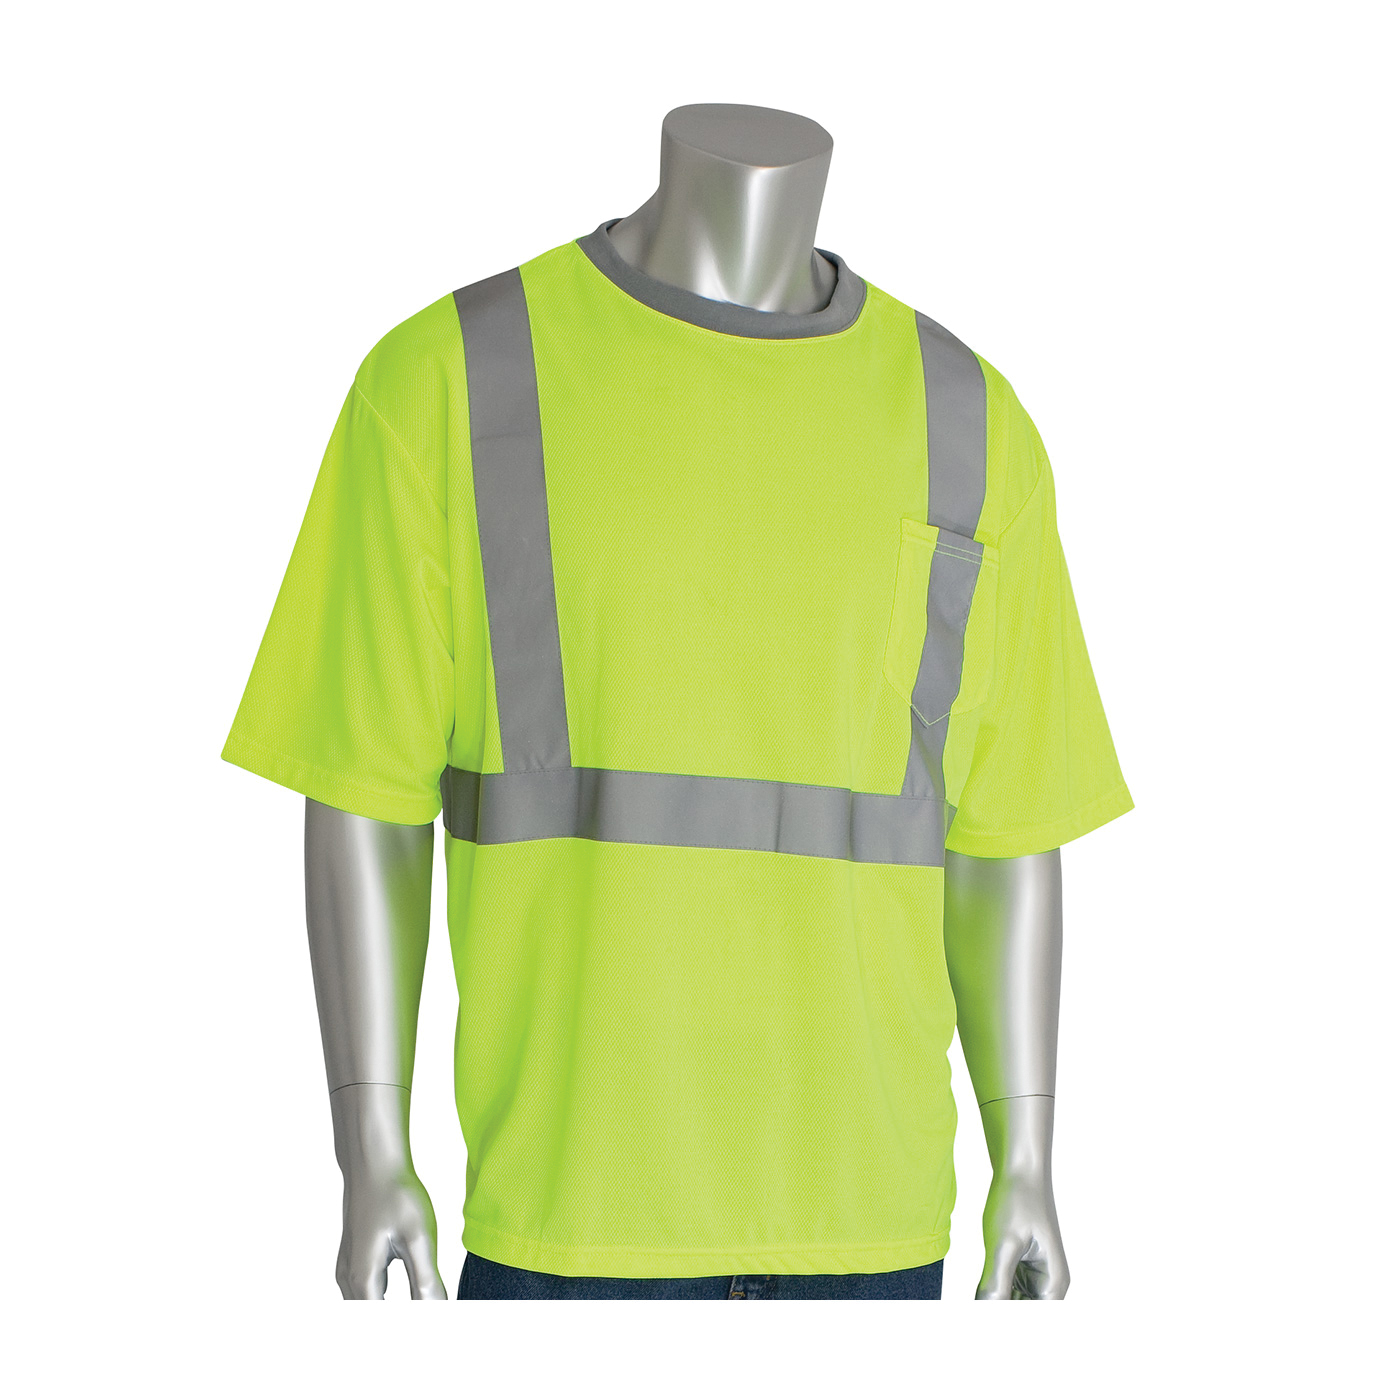 PIP® 312-1200-LY/M Short Sleeve Crew Neck T-Shirt With Reflective, M, Hi-Viz Lime Yellow, Bird's Eye Polyester, 30.3 in L